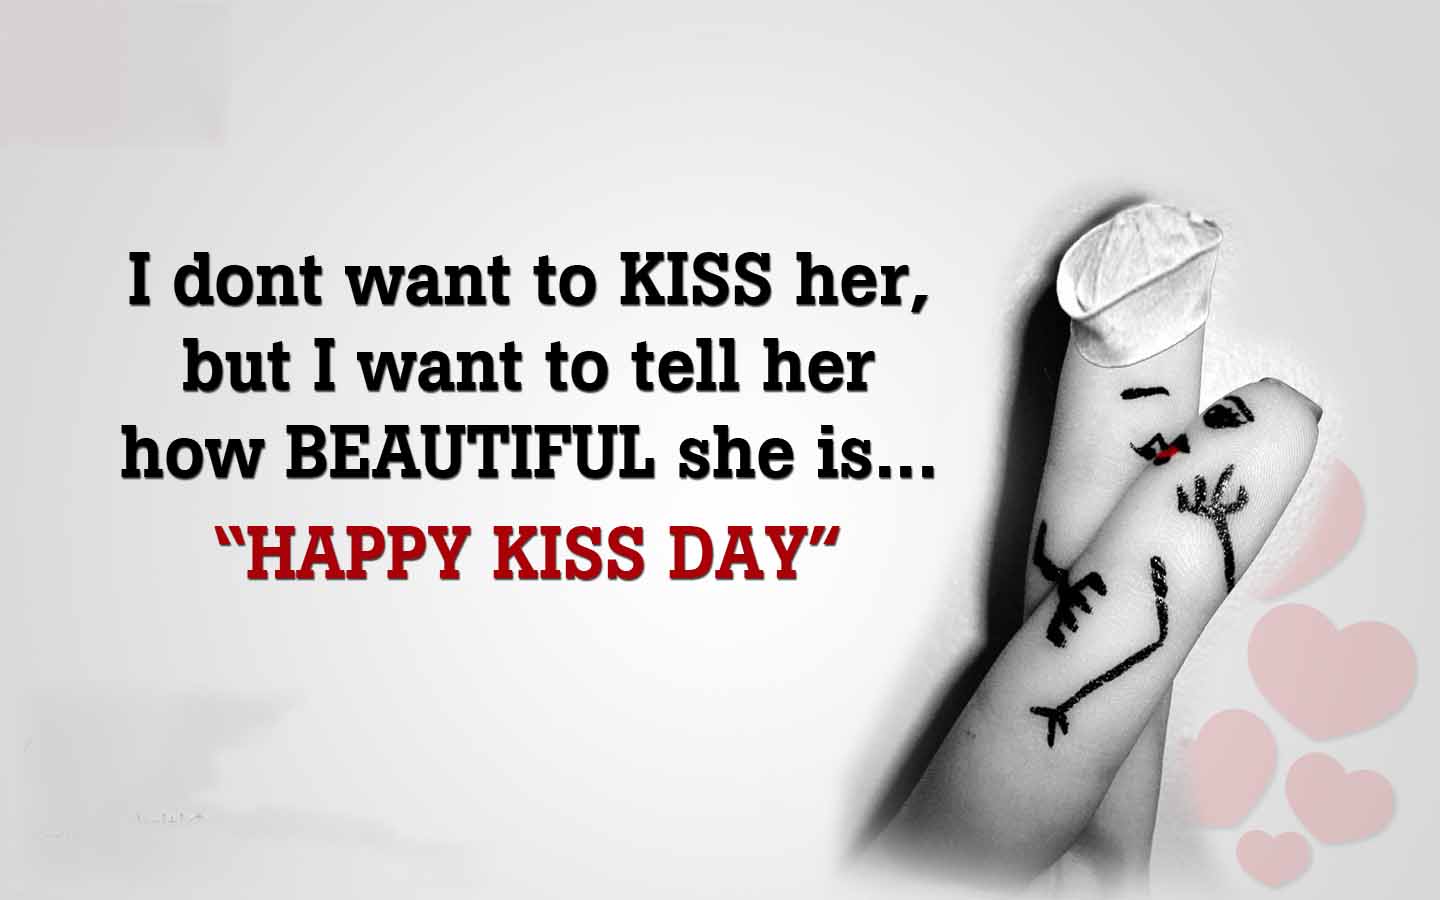 Download Kiss Wallpaper Kiss Day E Greetings Friendship Ecards Happy Kiss Day